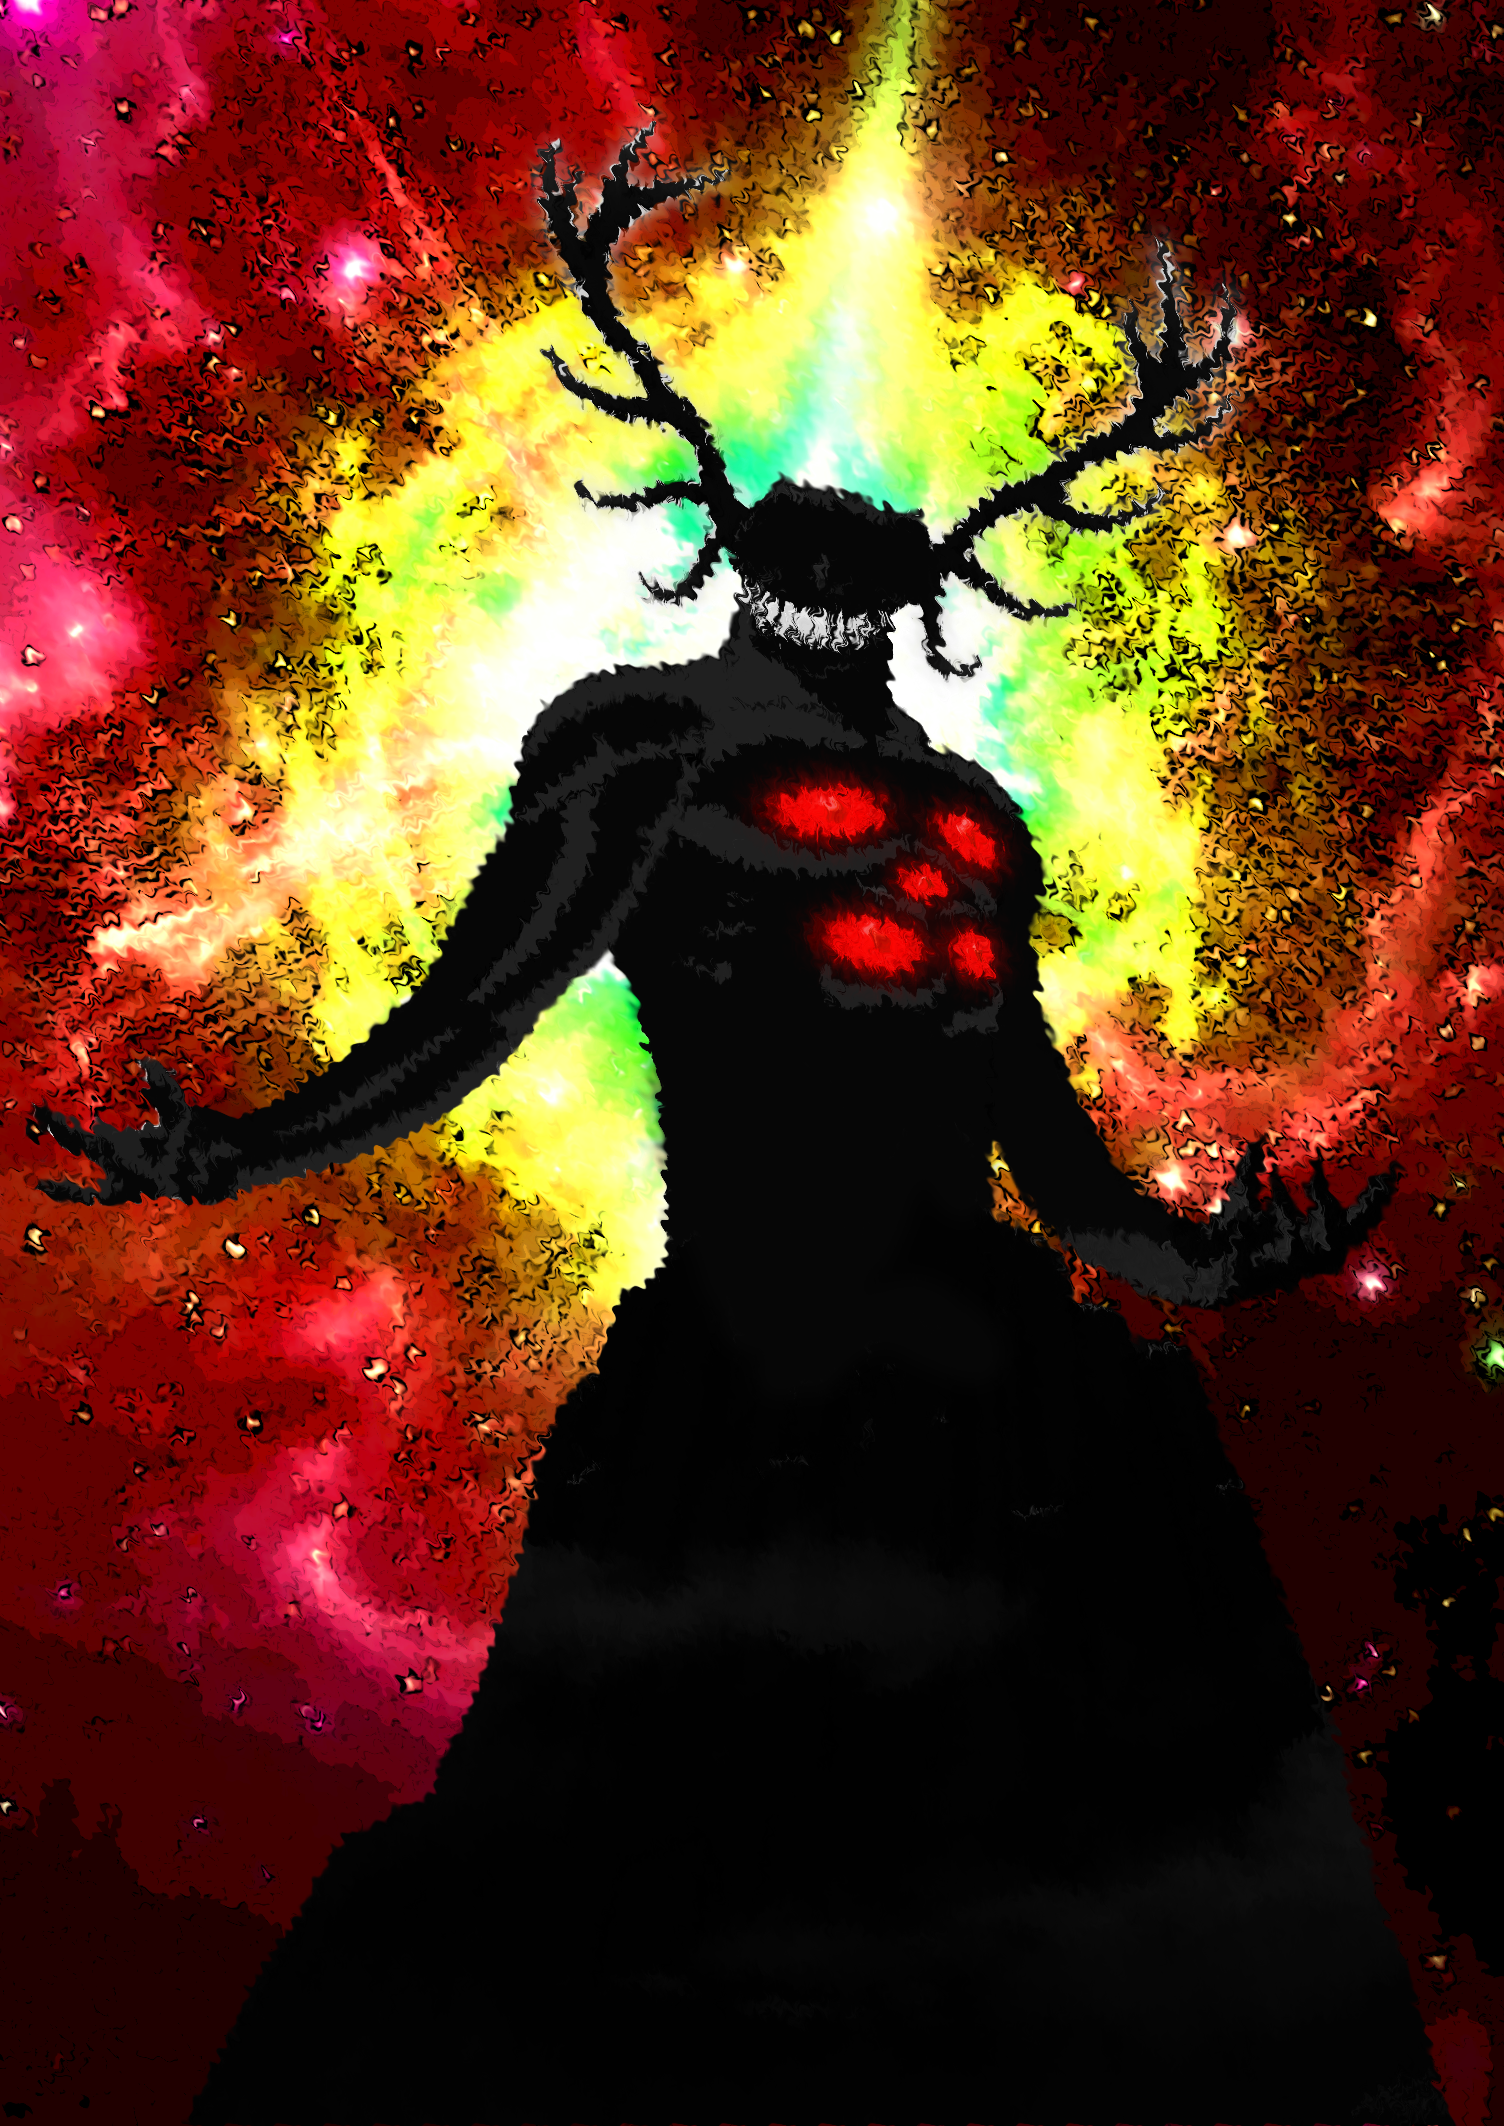 Scarlet King, main Antagonist of SCP Foundation. : r/SCP